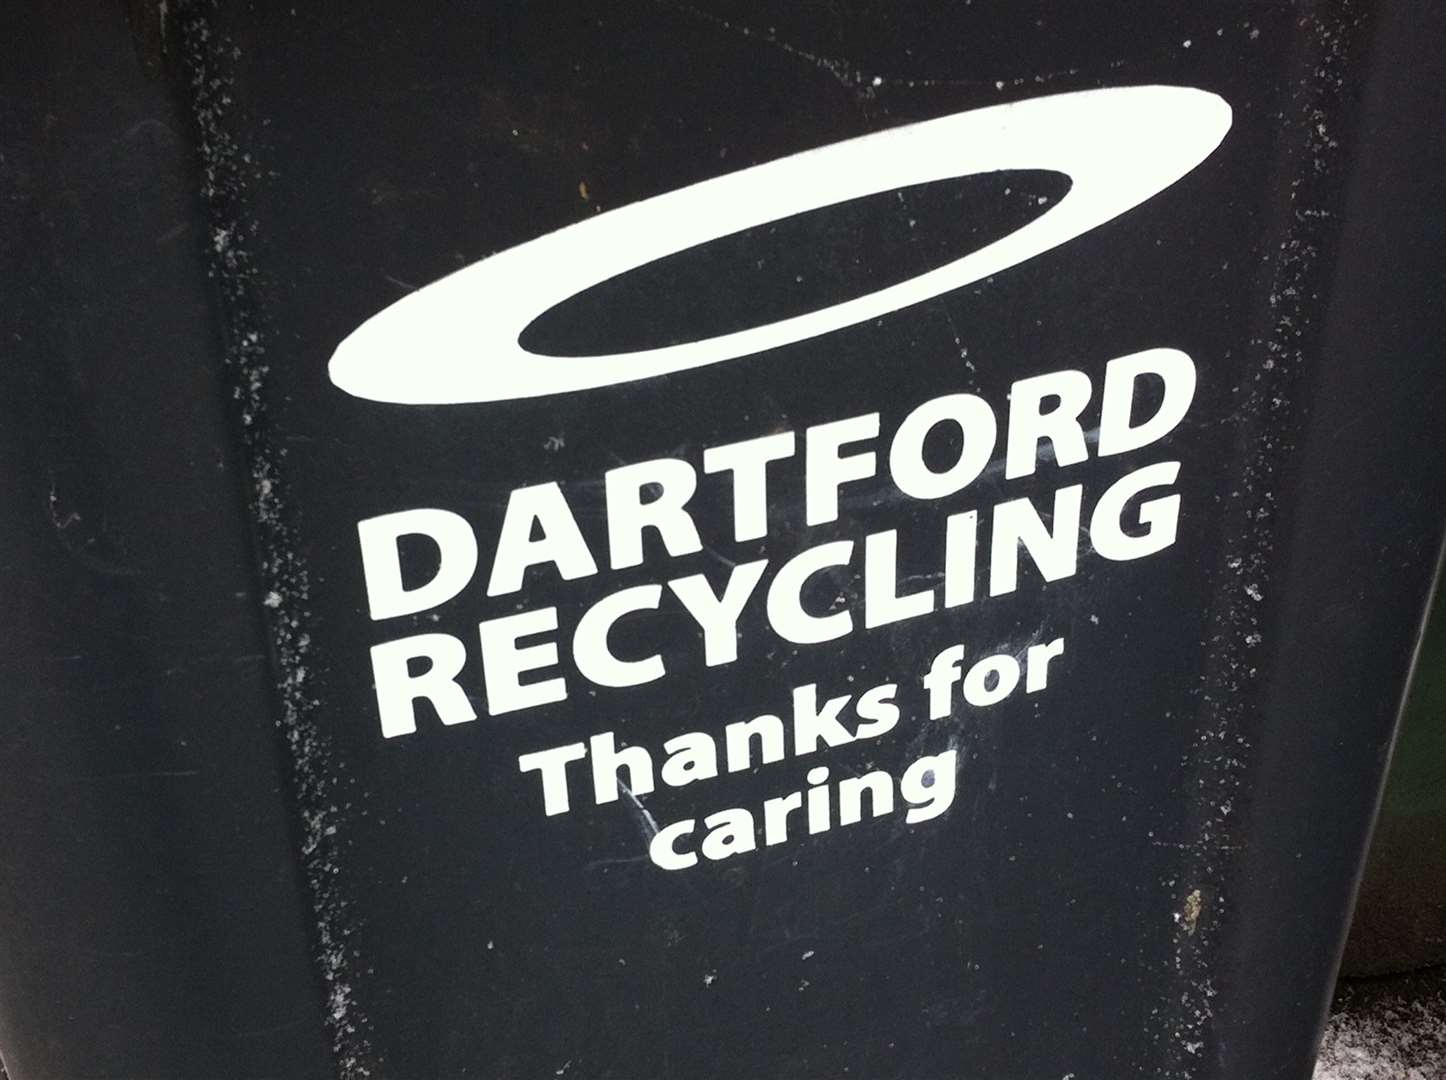 Dartford council apologised for the inconvenience caused by recent delays to certain services.